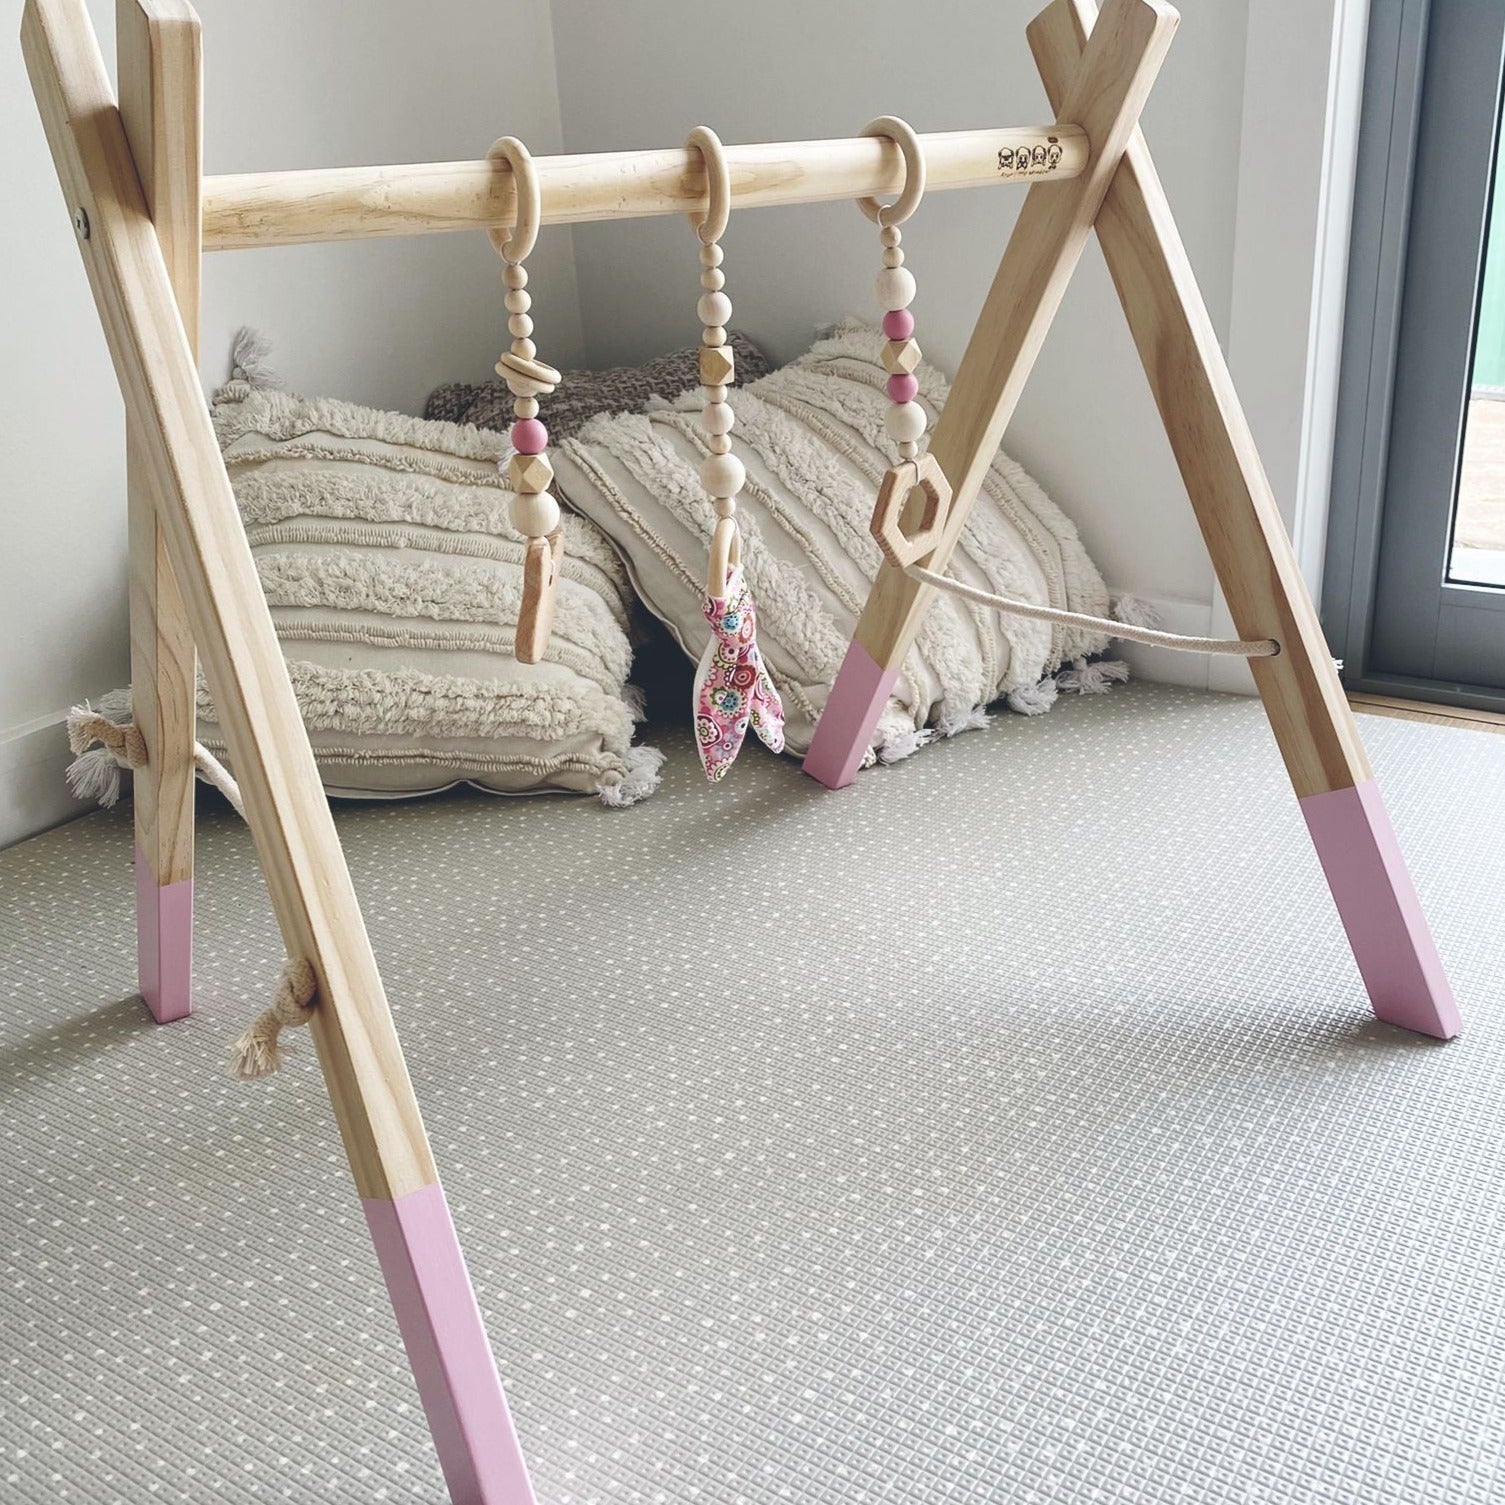 'Baby Play Gym in Pink colour' by Four Little Monkeys, exhibiting an eye-catching design with a pink touch and 3 removable hanging toys